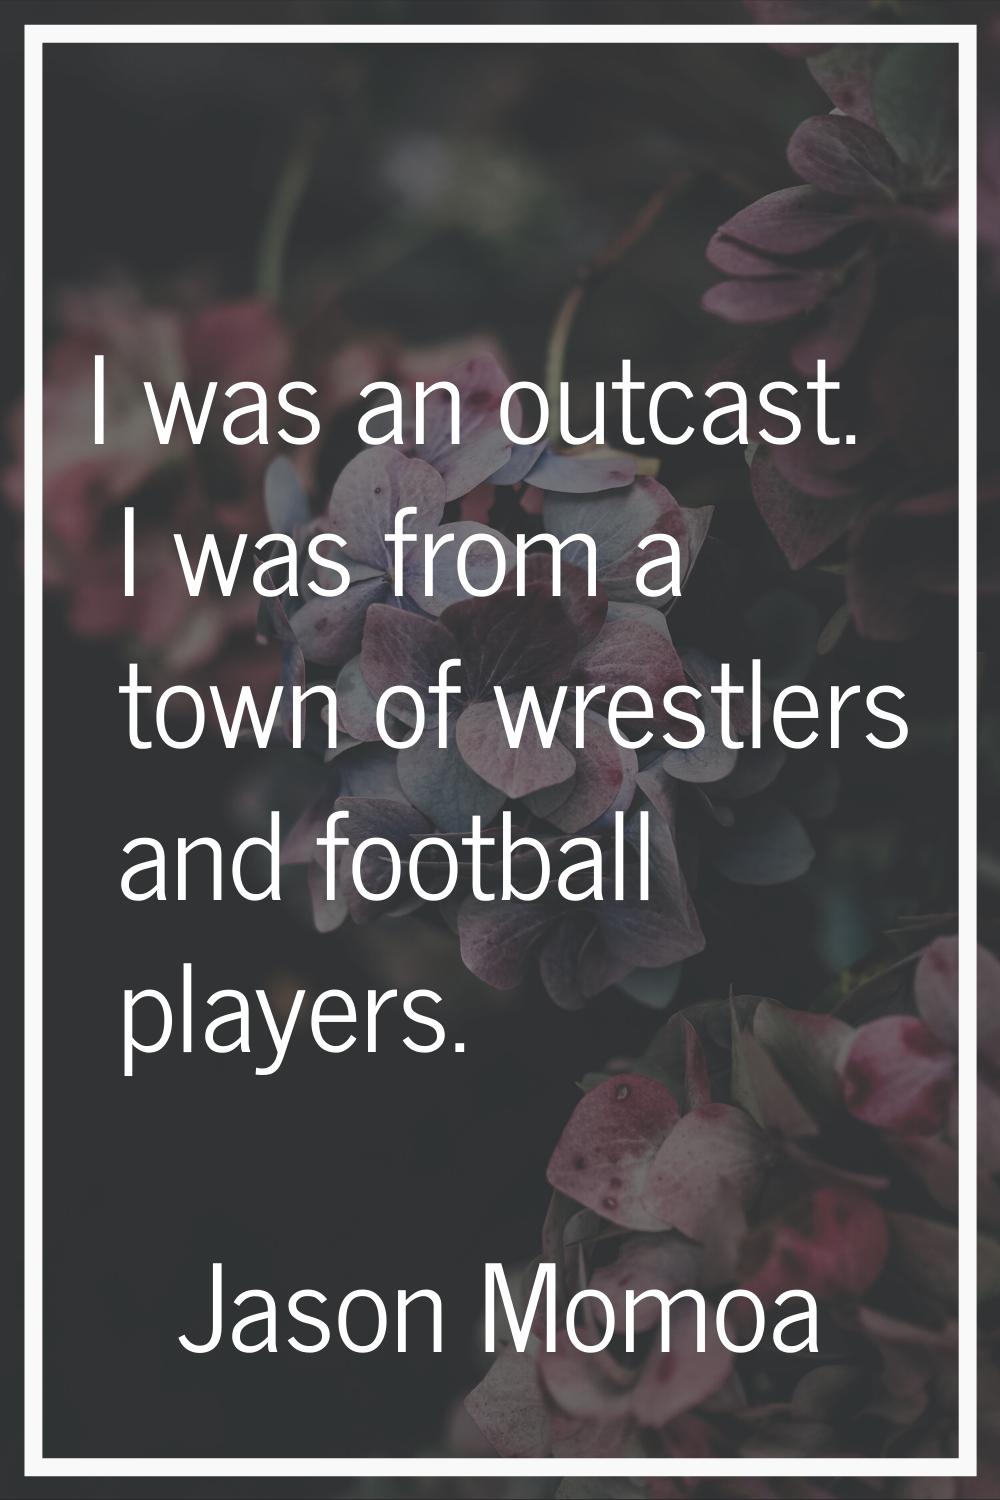 I was an outcast. I was from a town of wrestlers and football players.